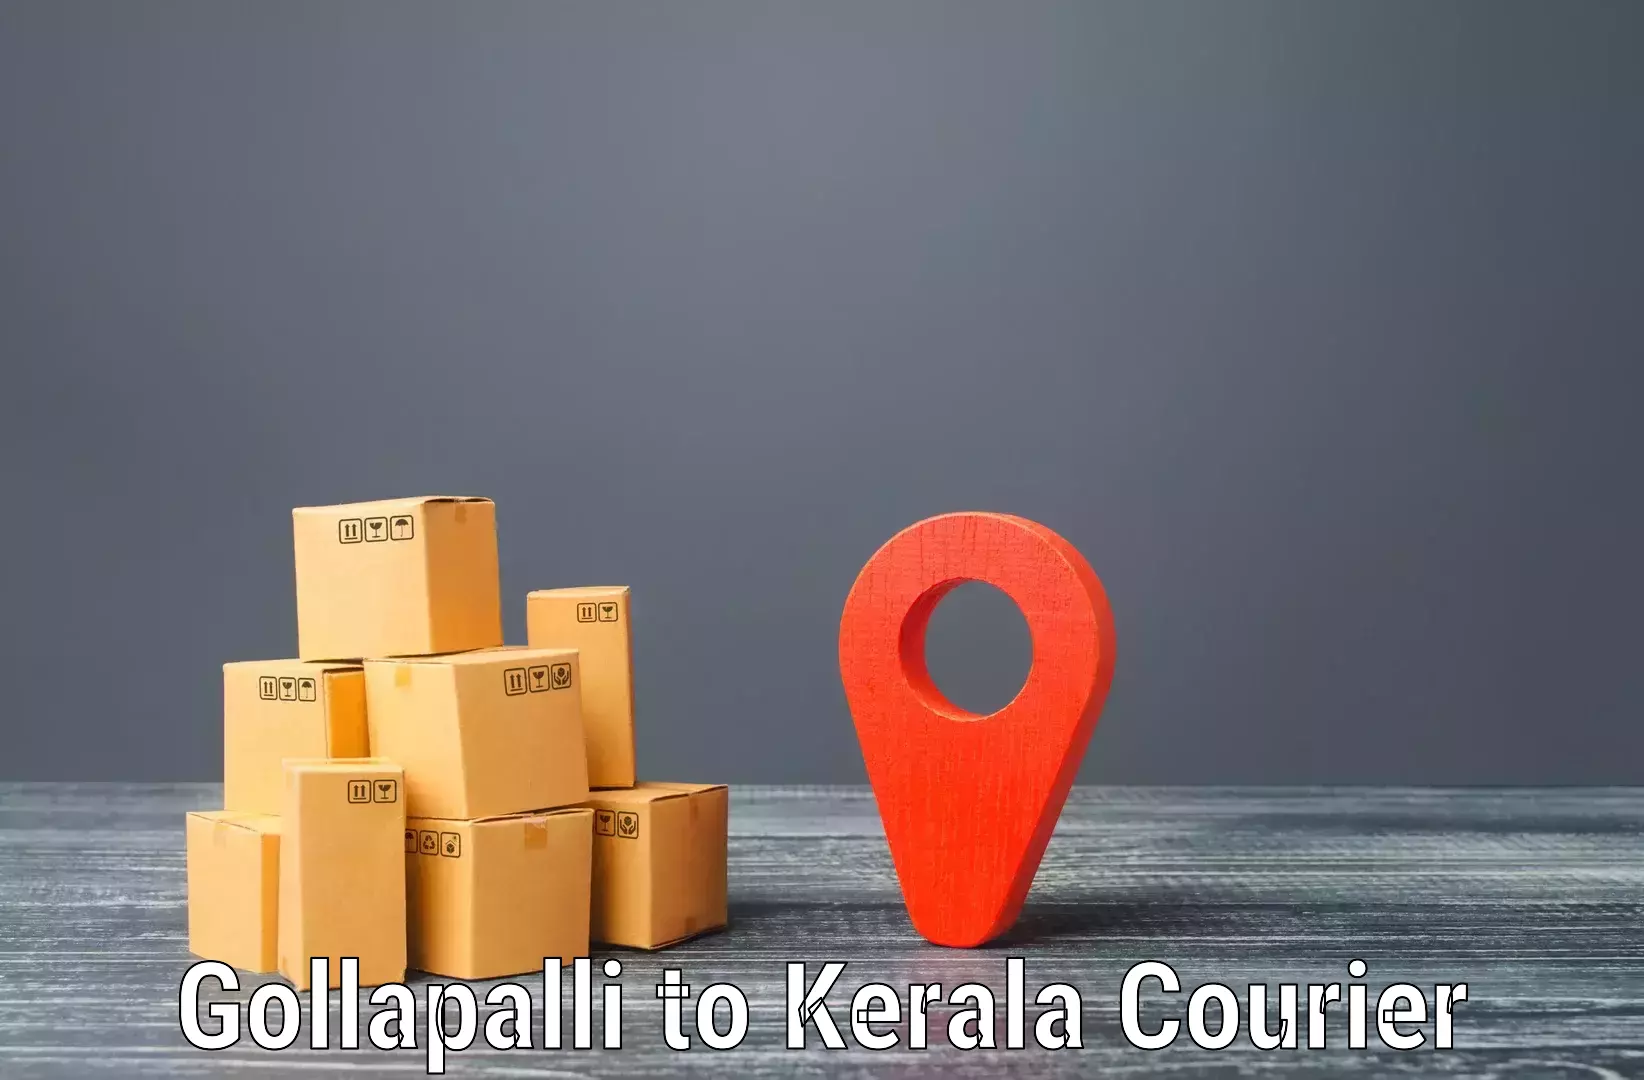 Same-day delivery solutions Gollapalli to Kozhencherry